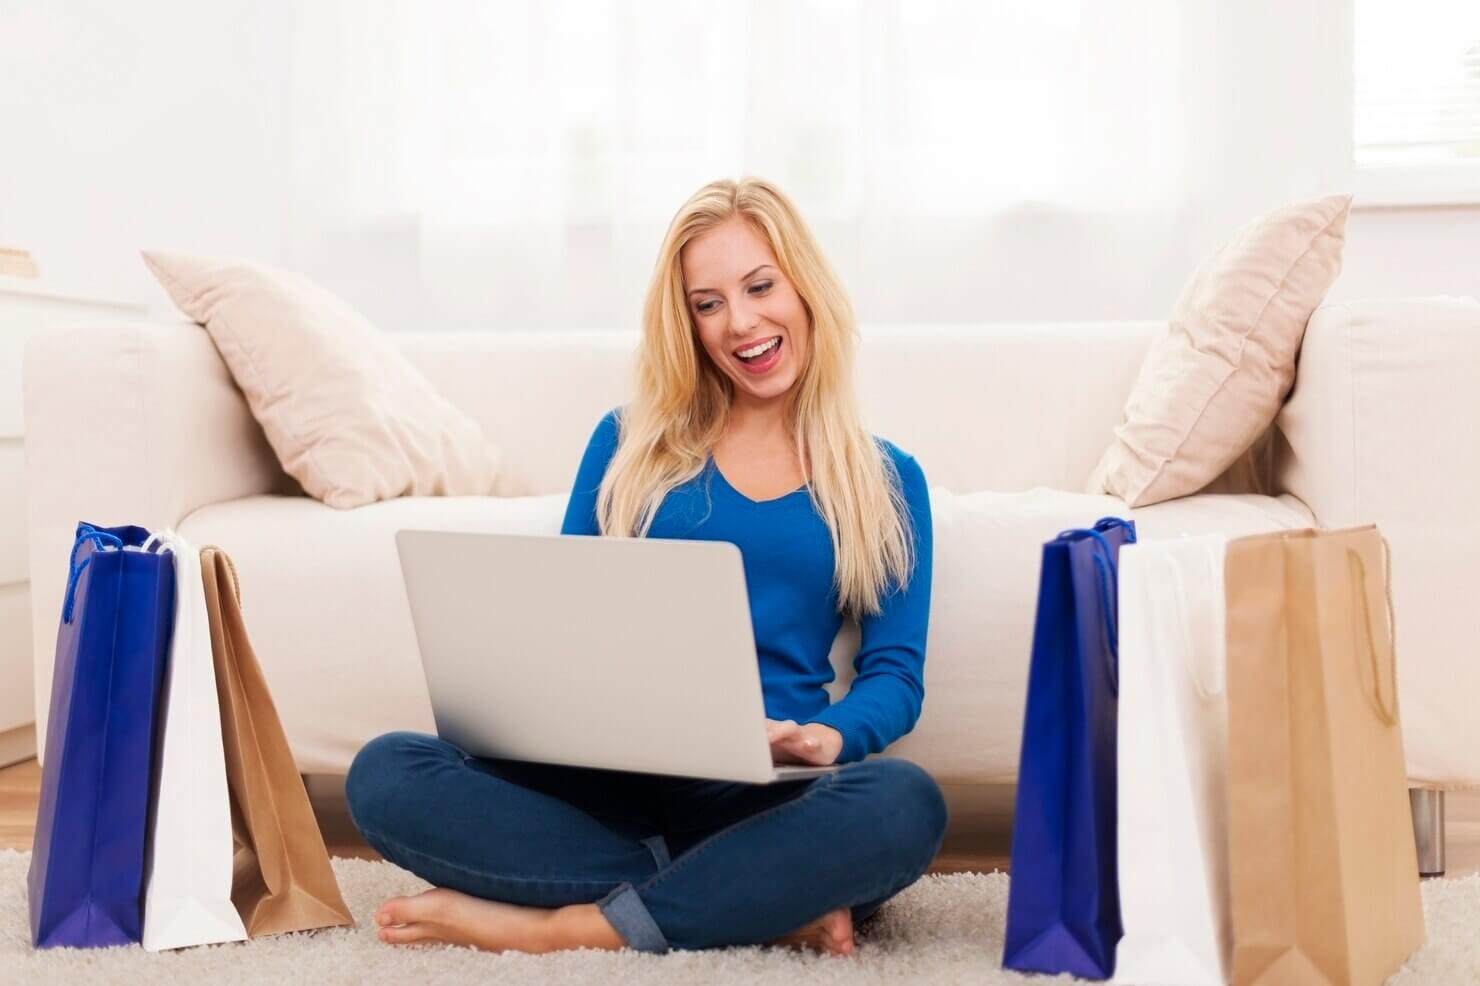 Happy woman shopping online. She enjoyed a postive user experience due to online shop support services that keep site up to date